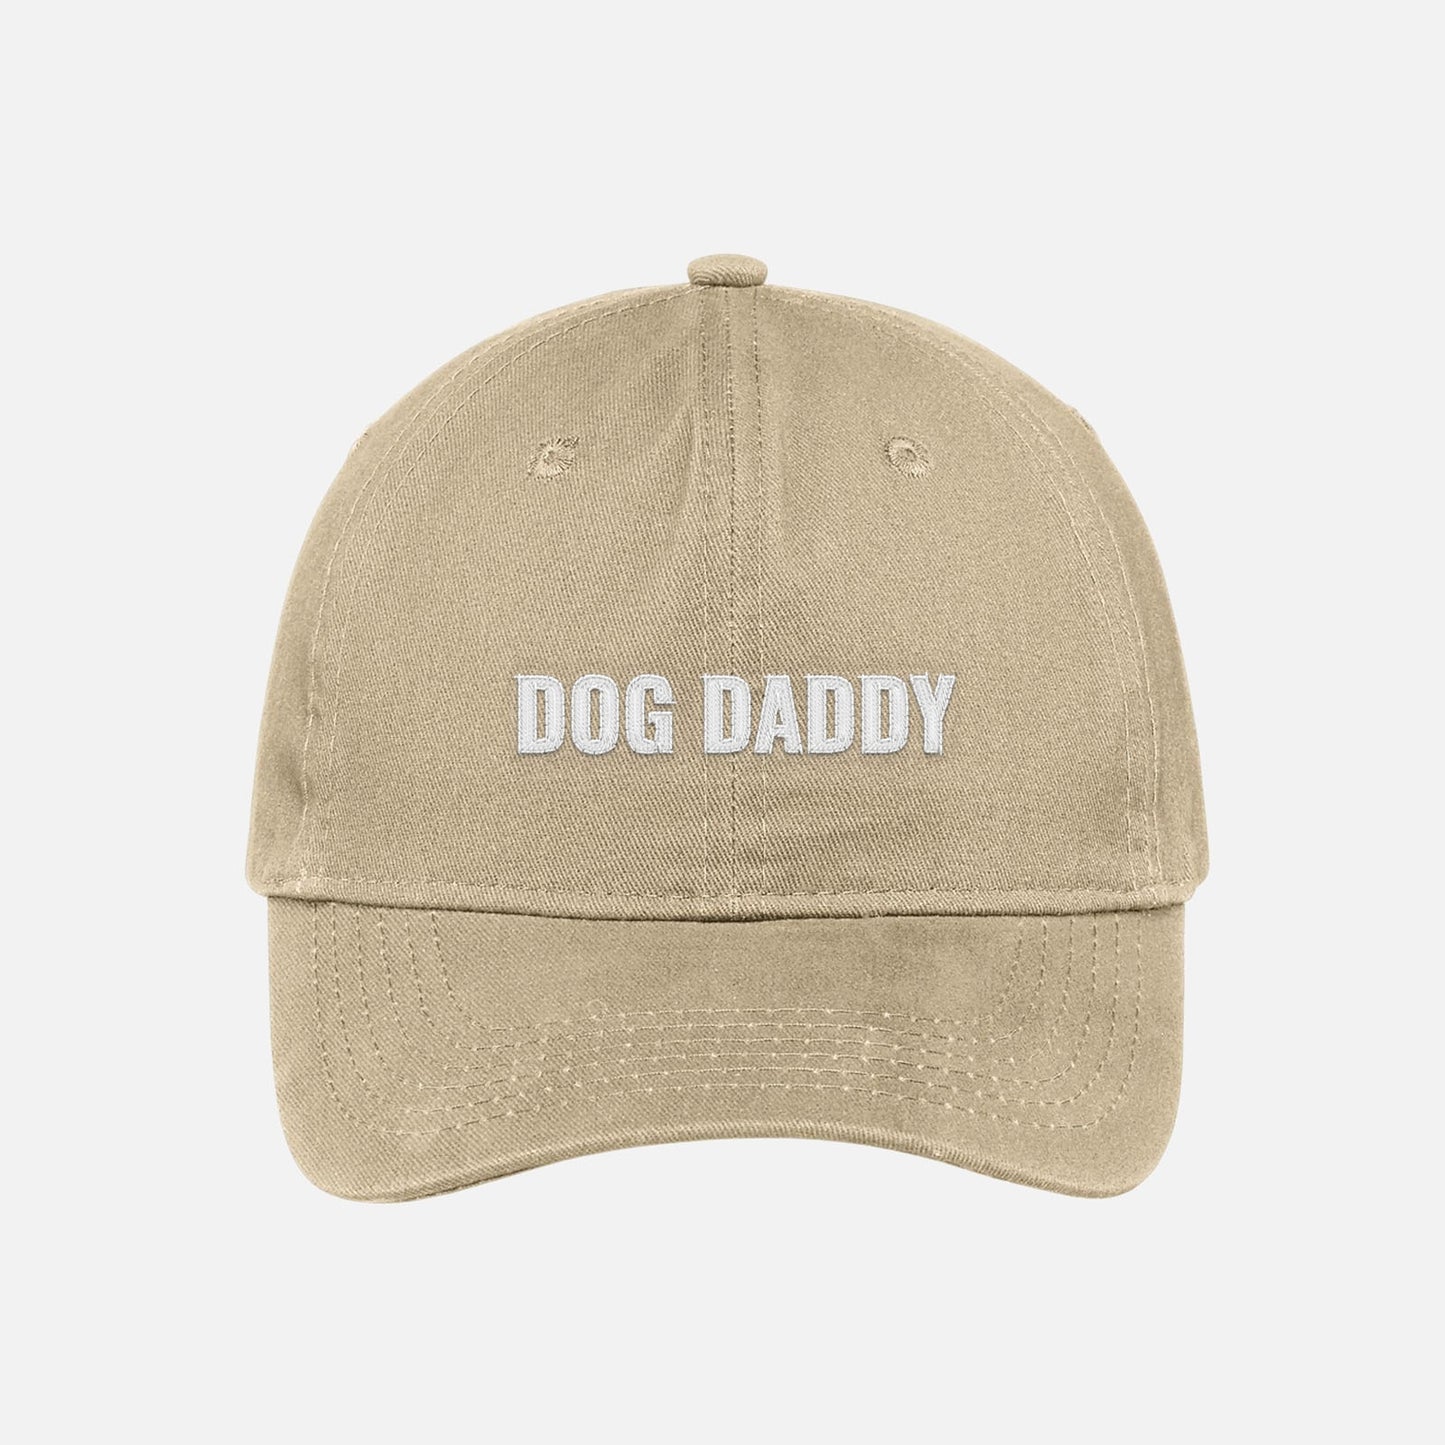 Khaki dog daddy dad hat embroidered baseball cap with white text.